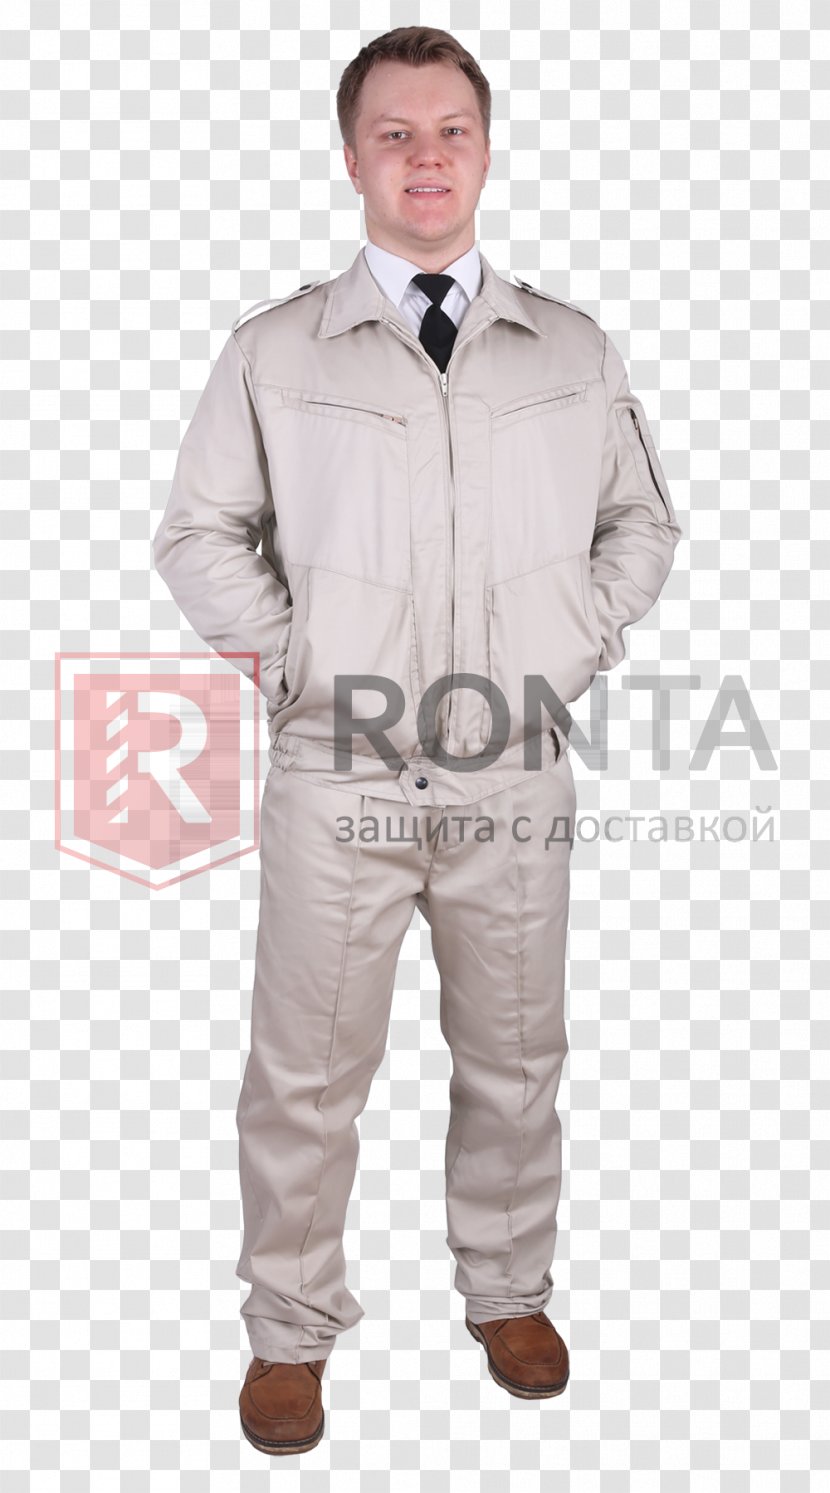 Outerwear Jacket Sleeve Transparent PNG